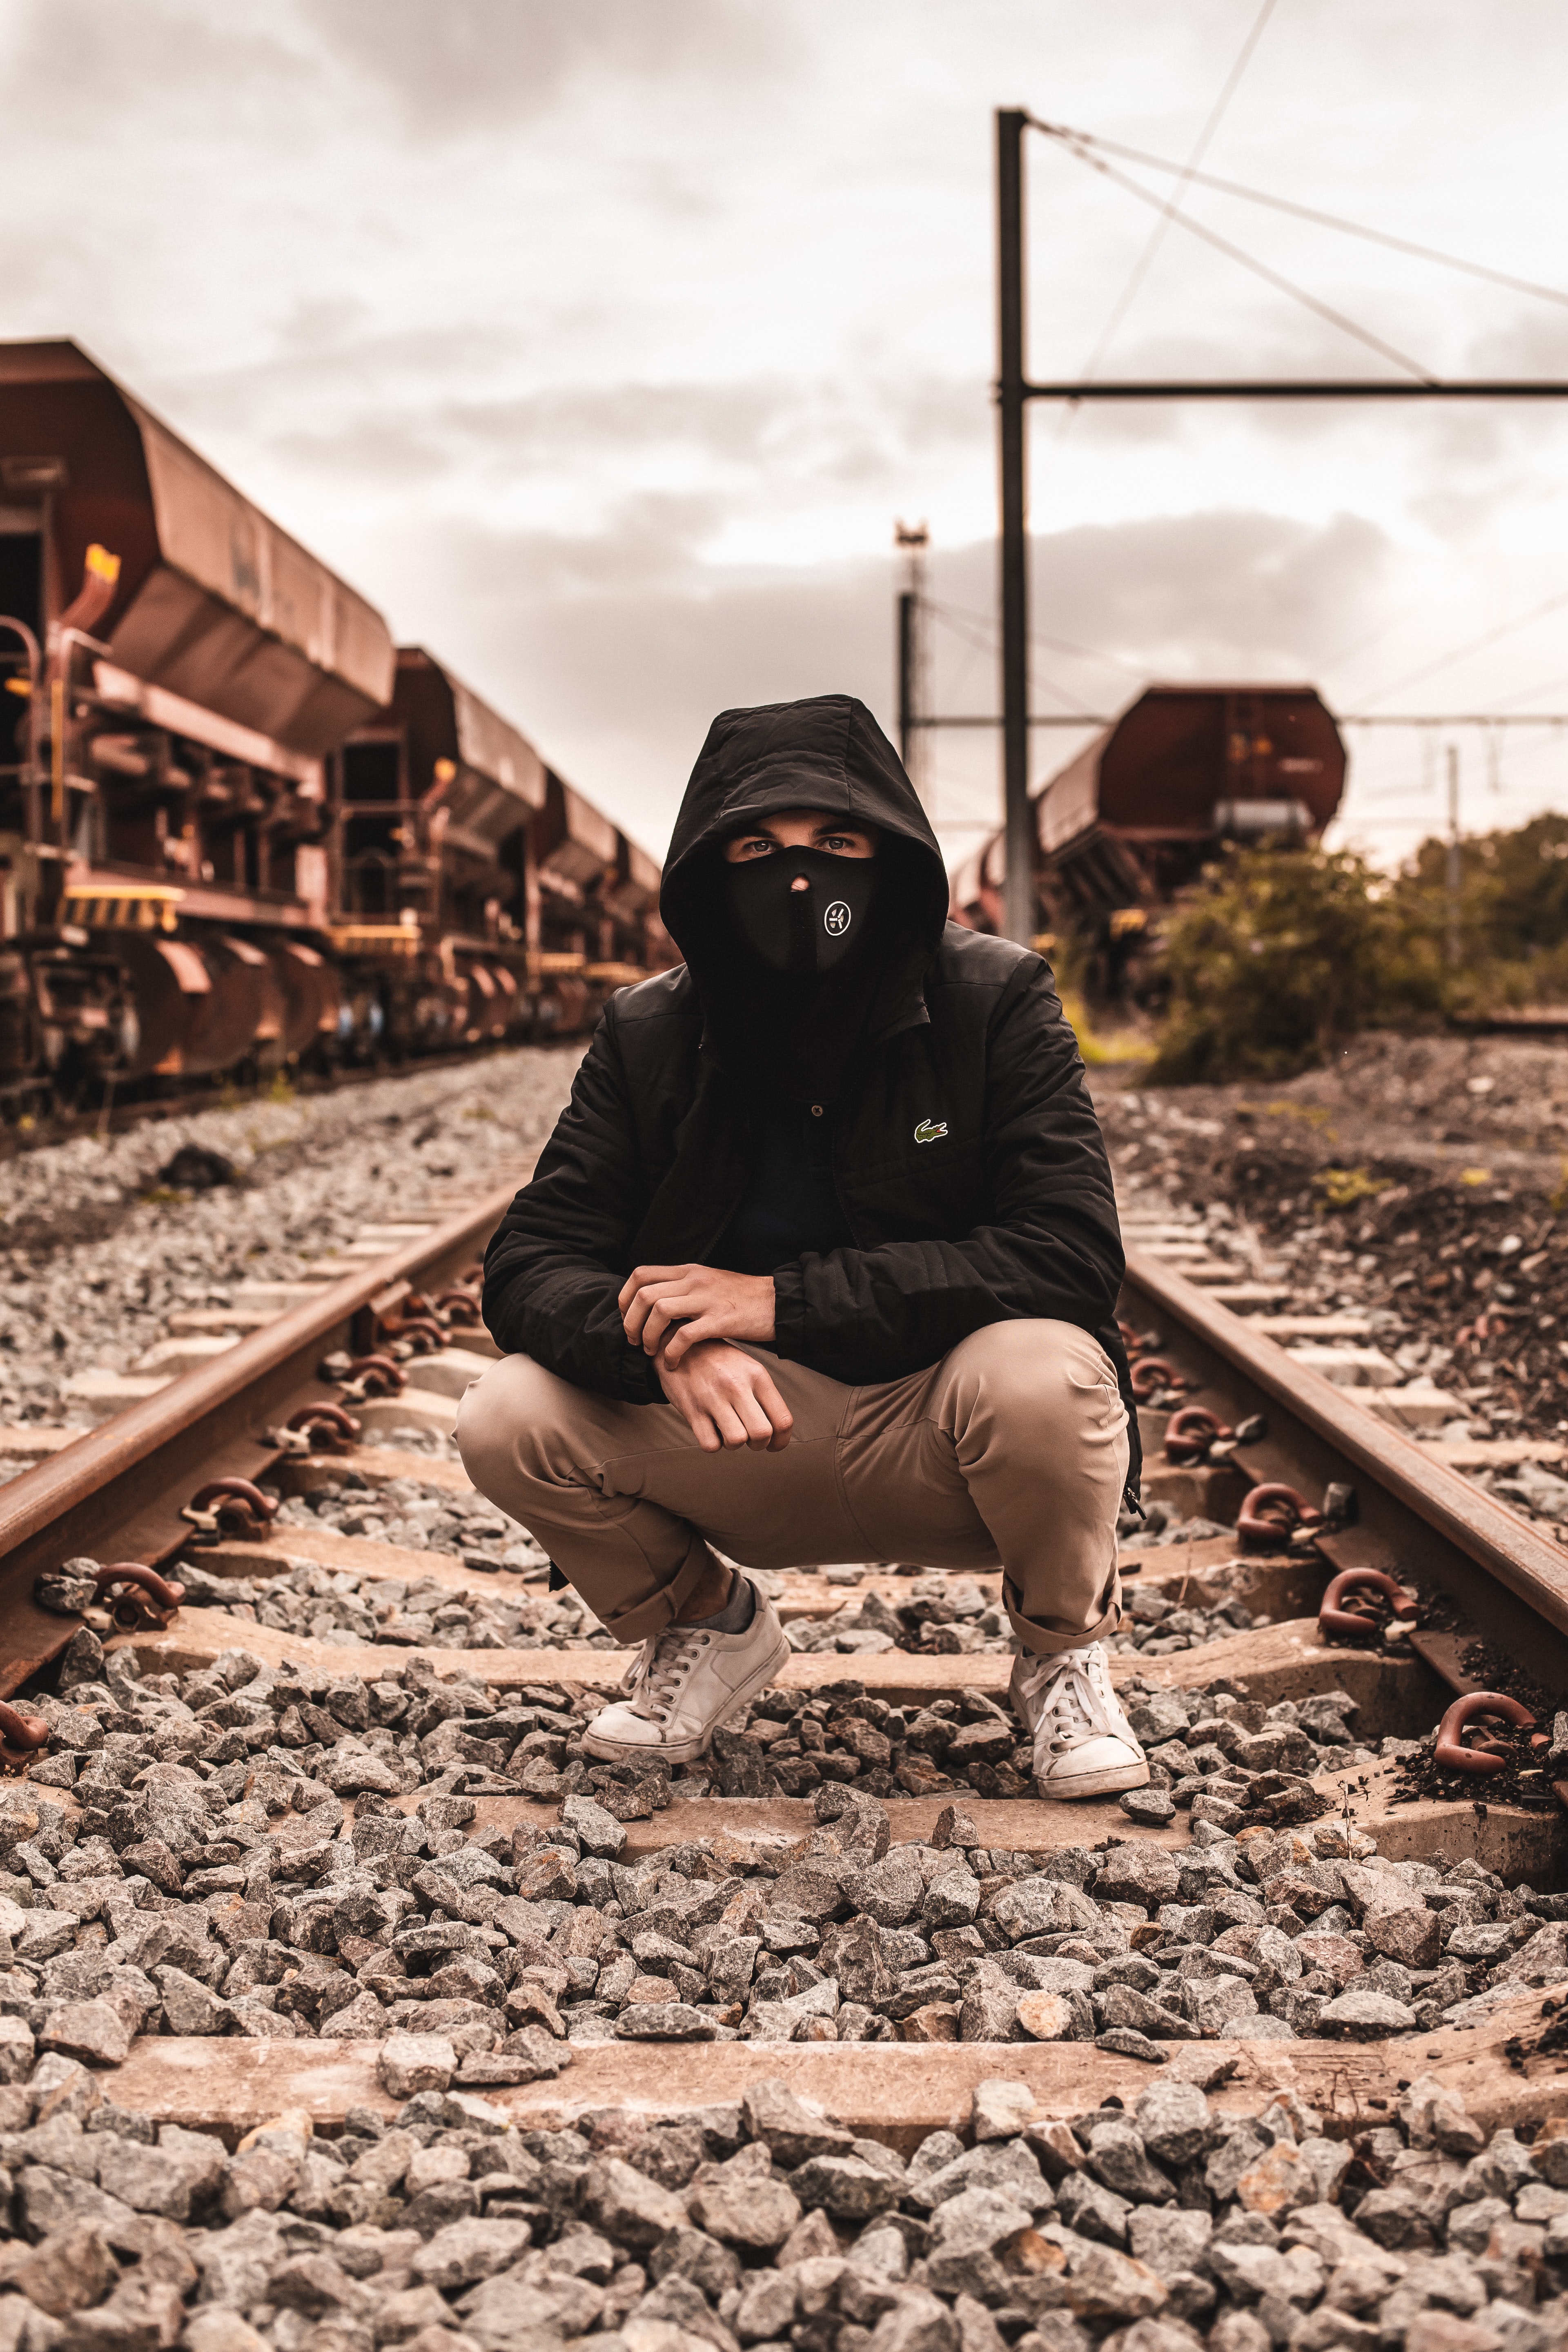 136364 Screensavers and Wallpapers Man for phone. Download miscellanea, miscellaneous, man, mask, railway, hood, rails pictures for free